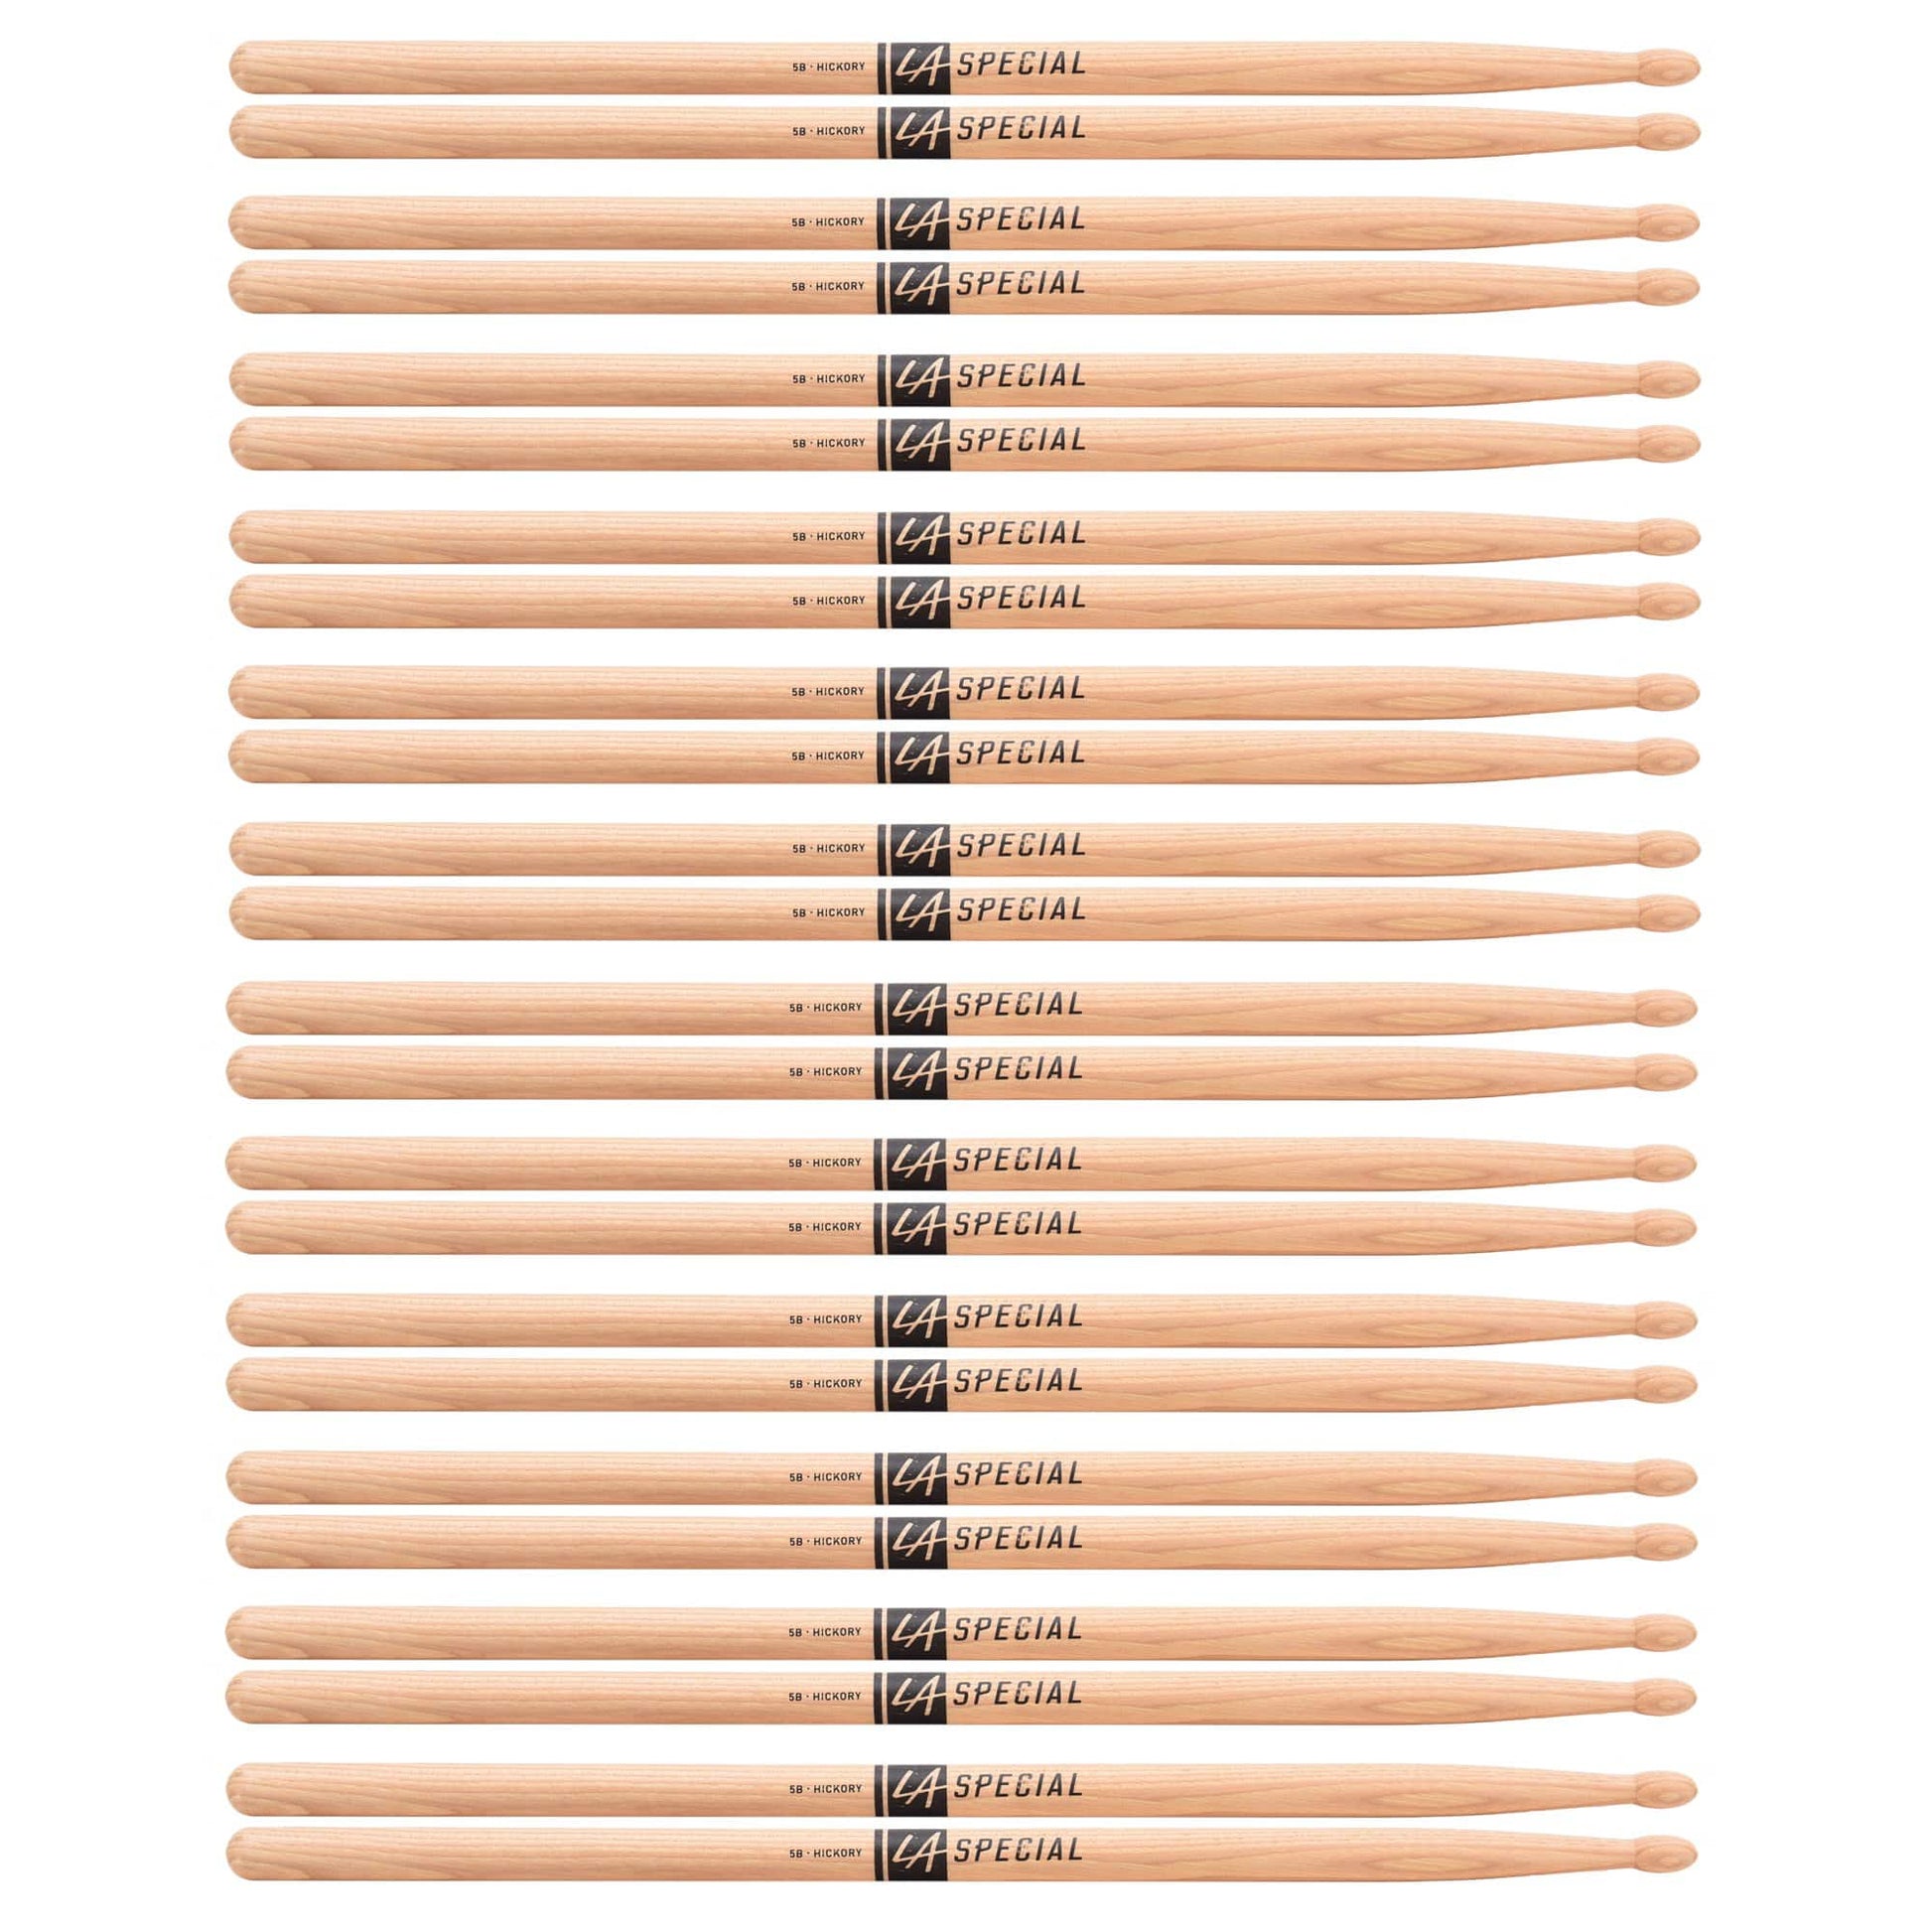 Promark LA Special 5B Wood Tip Drum Sticks (12 Pair Bundle) Drums and Percussion / Parts and Accessories / Drum Sticks and Mallets